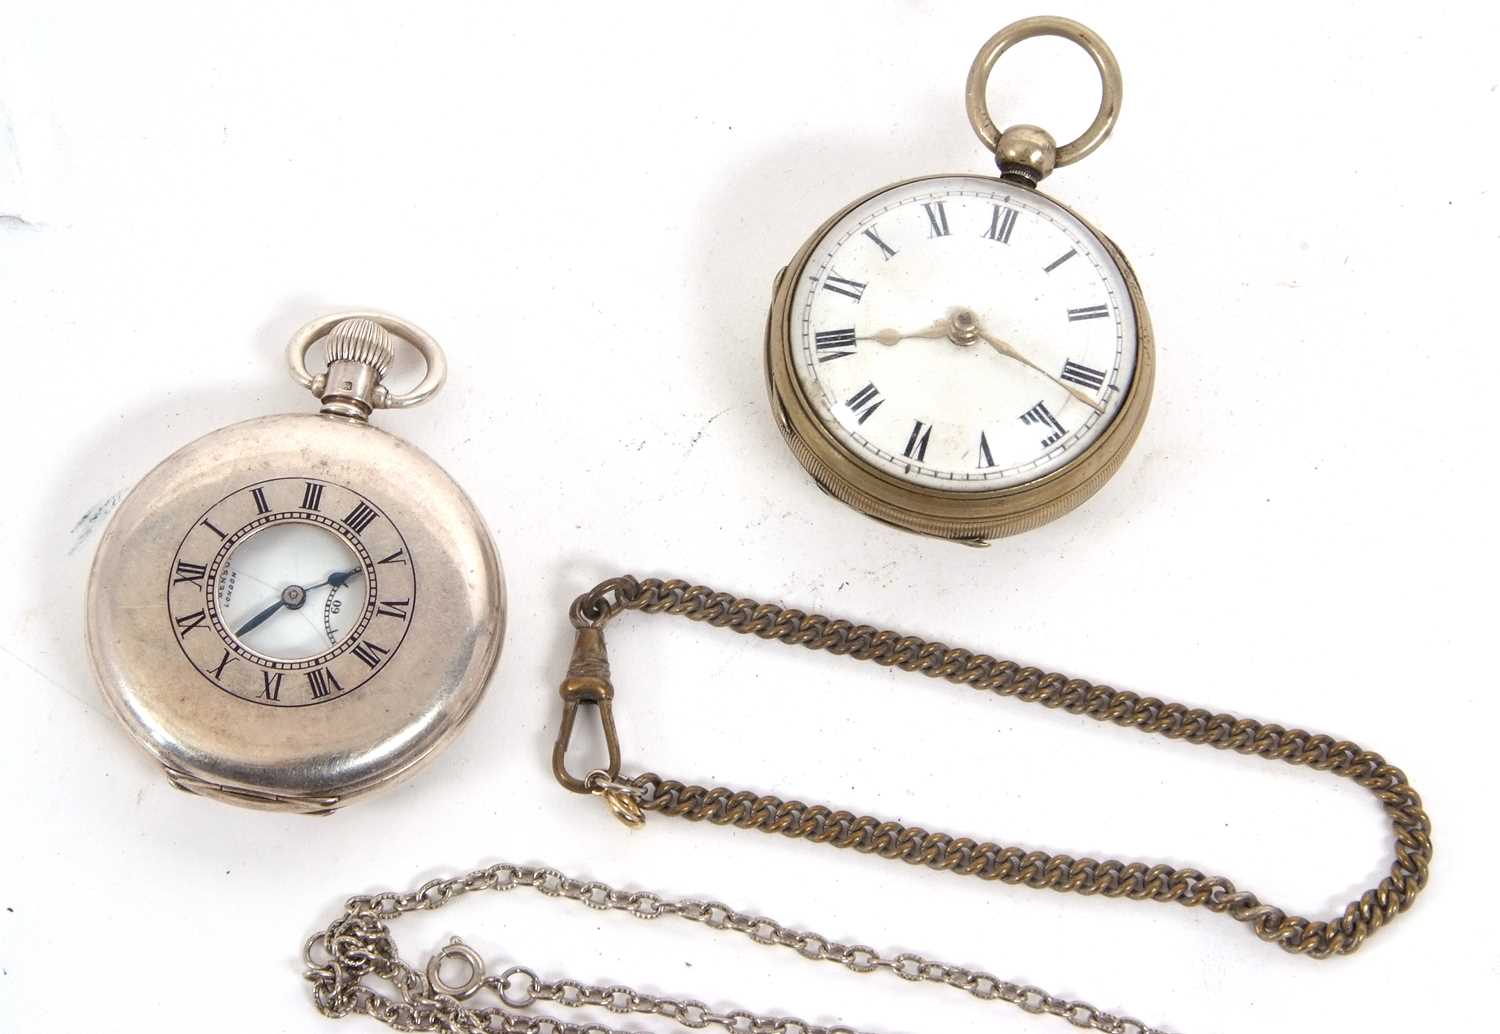 A mixed lot of two pocket watches and three metal chains, one of the pocket watches is a silver J - Image 2 of 2